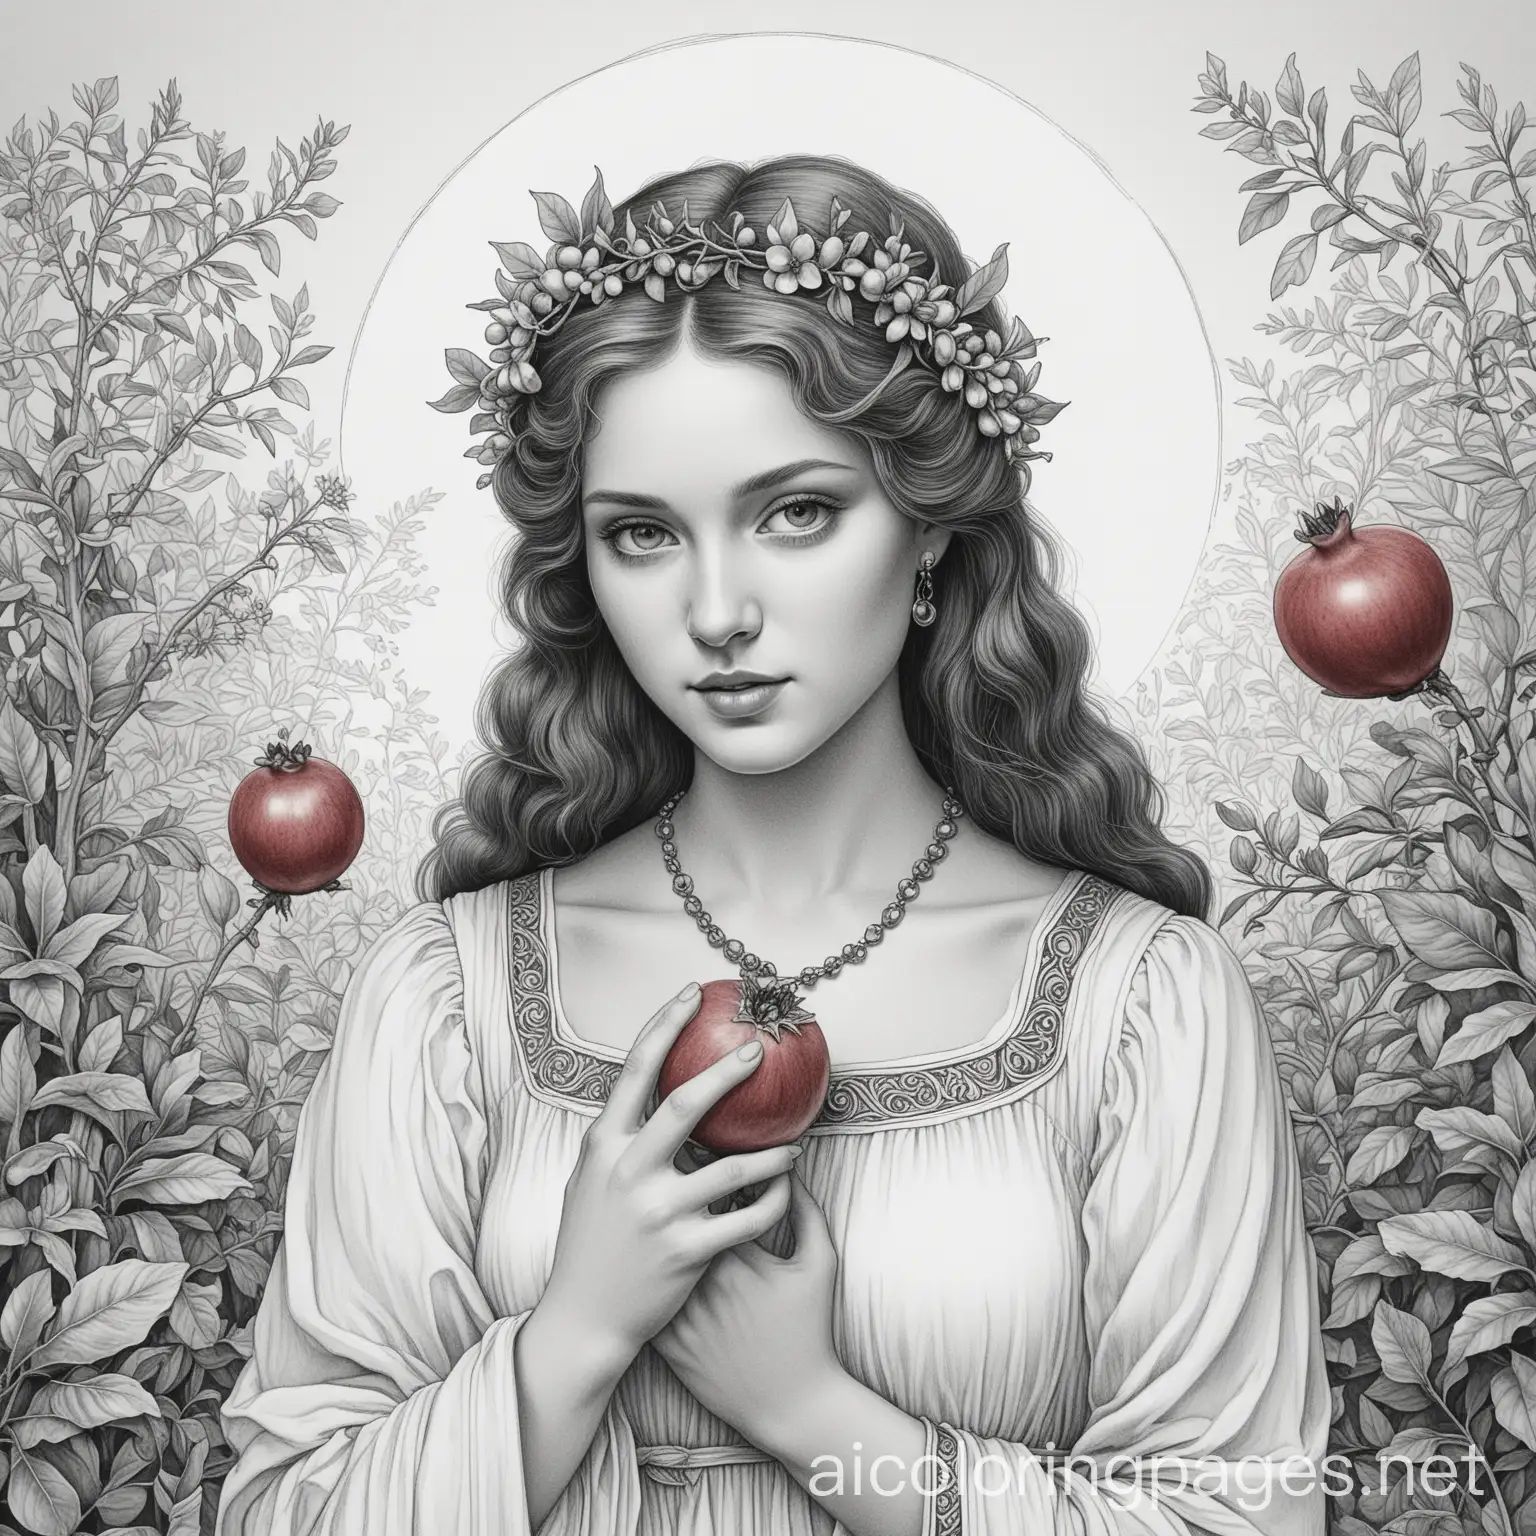 Persephone and the Pomegranate** - A serene depiction of Persephone holding a pomegranate, with elements of the underworld flora framing her. classical illustration style, fine art, Coloring Page, black and white, line art, white background, Simplicity, Ample White Space. The background of the coloring page is plain white to make it easy for young children to color within the lines. The outlines of all the subjects are easy to distinguish, making it simple for kids to color without too much difficulty